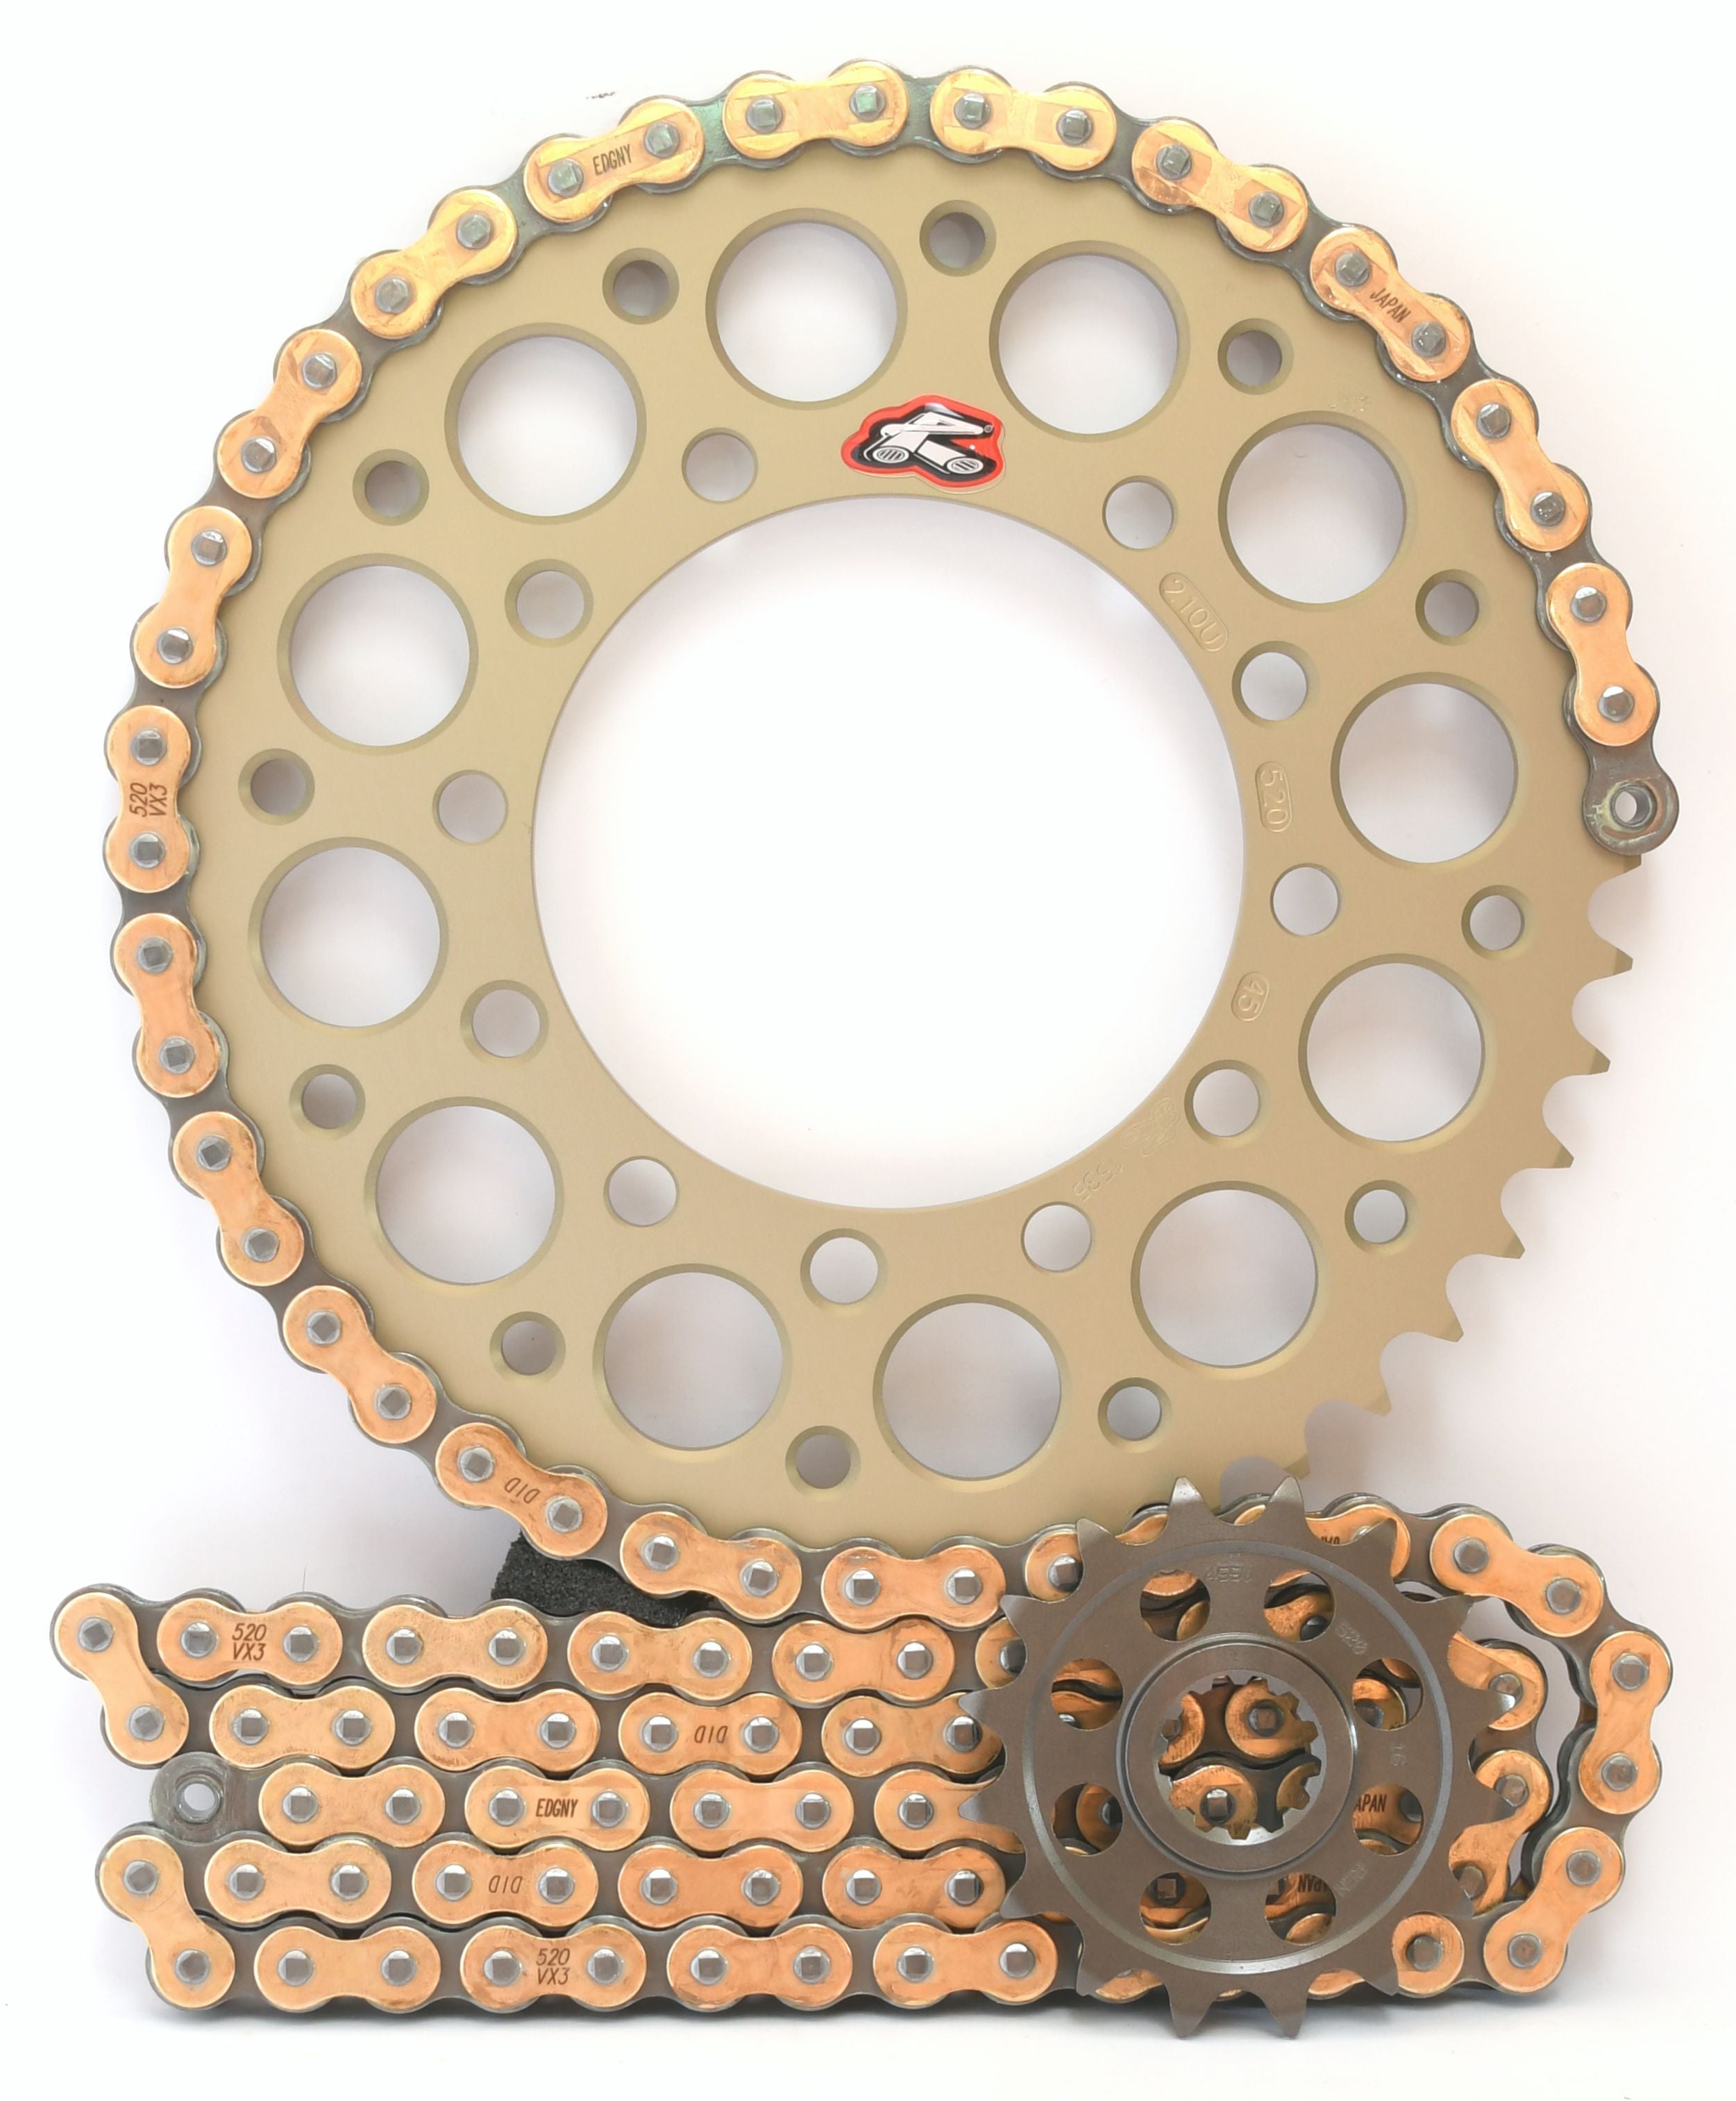 Renthal Ultralight and DID 520 Conversion Chain & Sprocket Kit for Suzuki GSX-R1000 2007-2008 - Standard Gearing